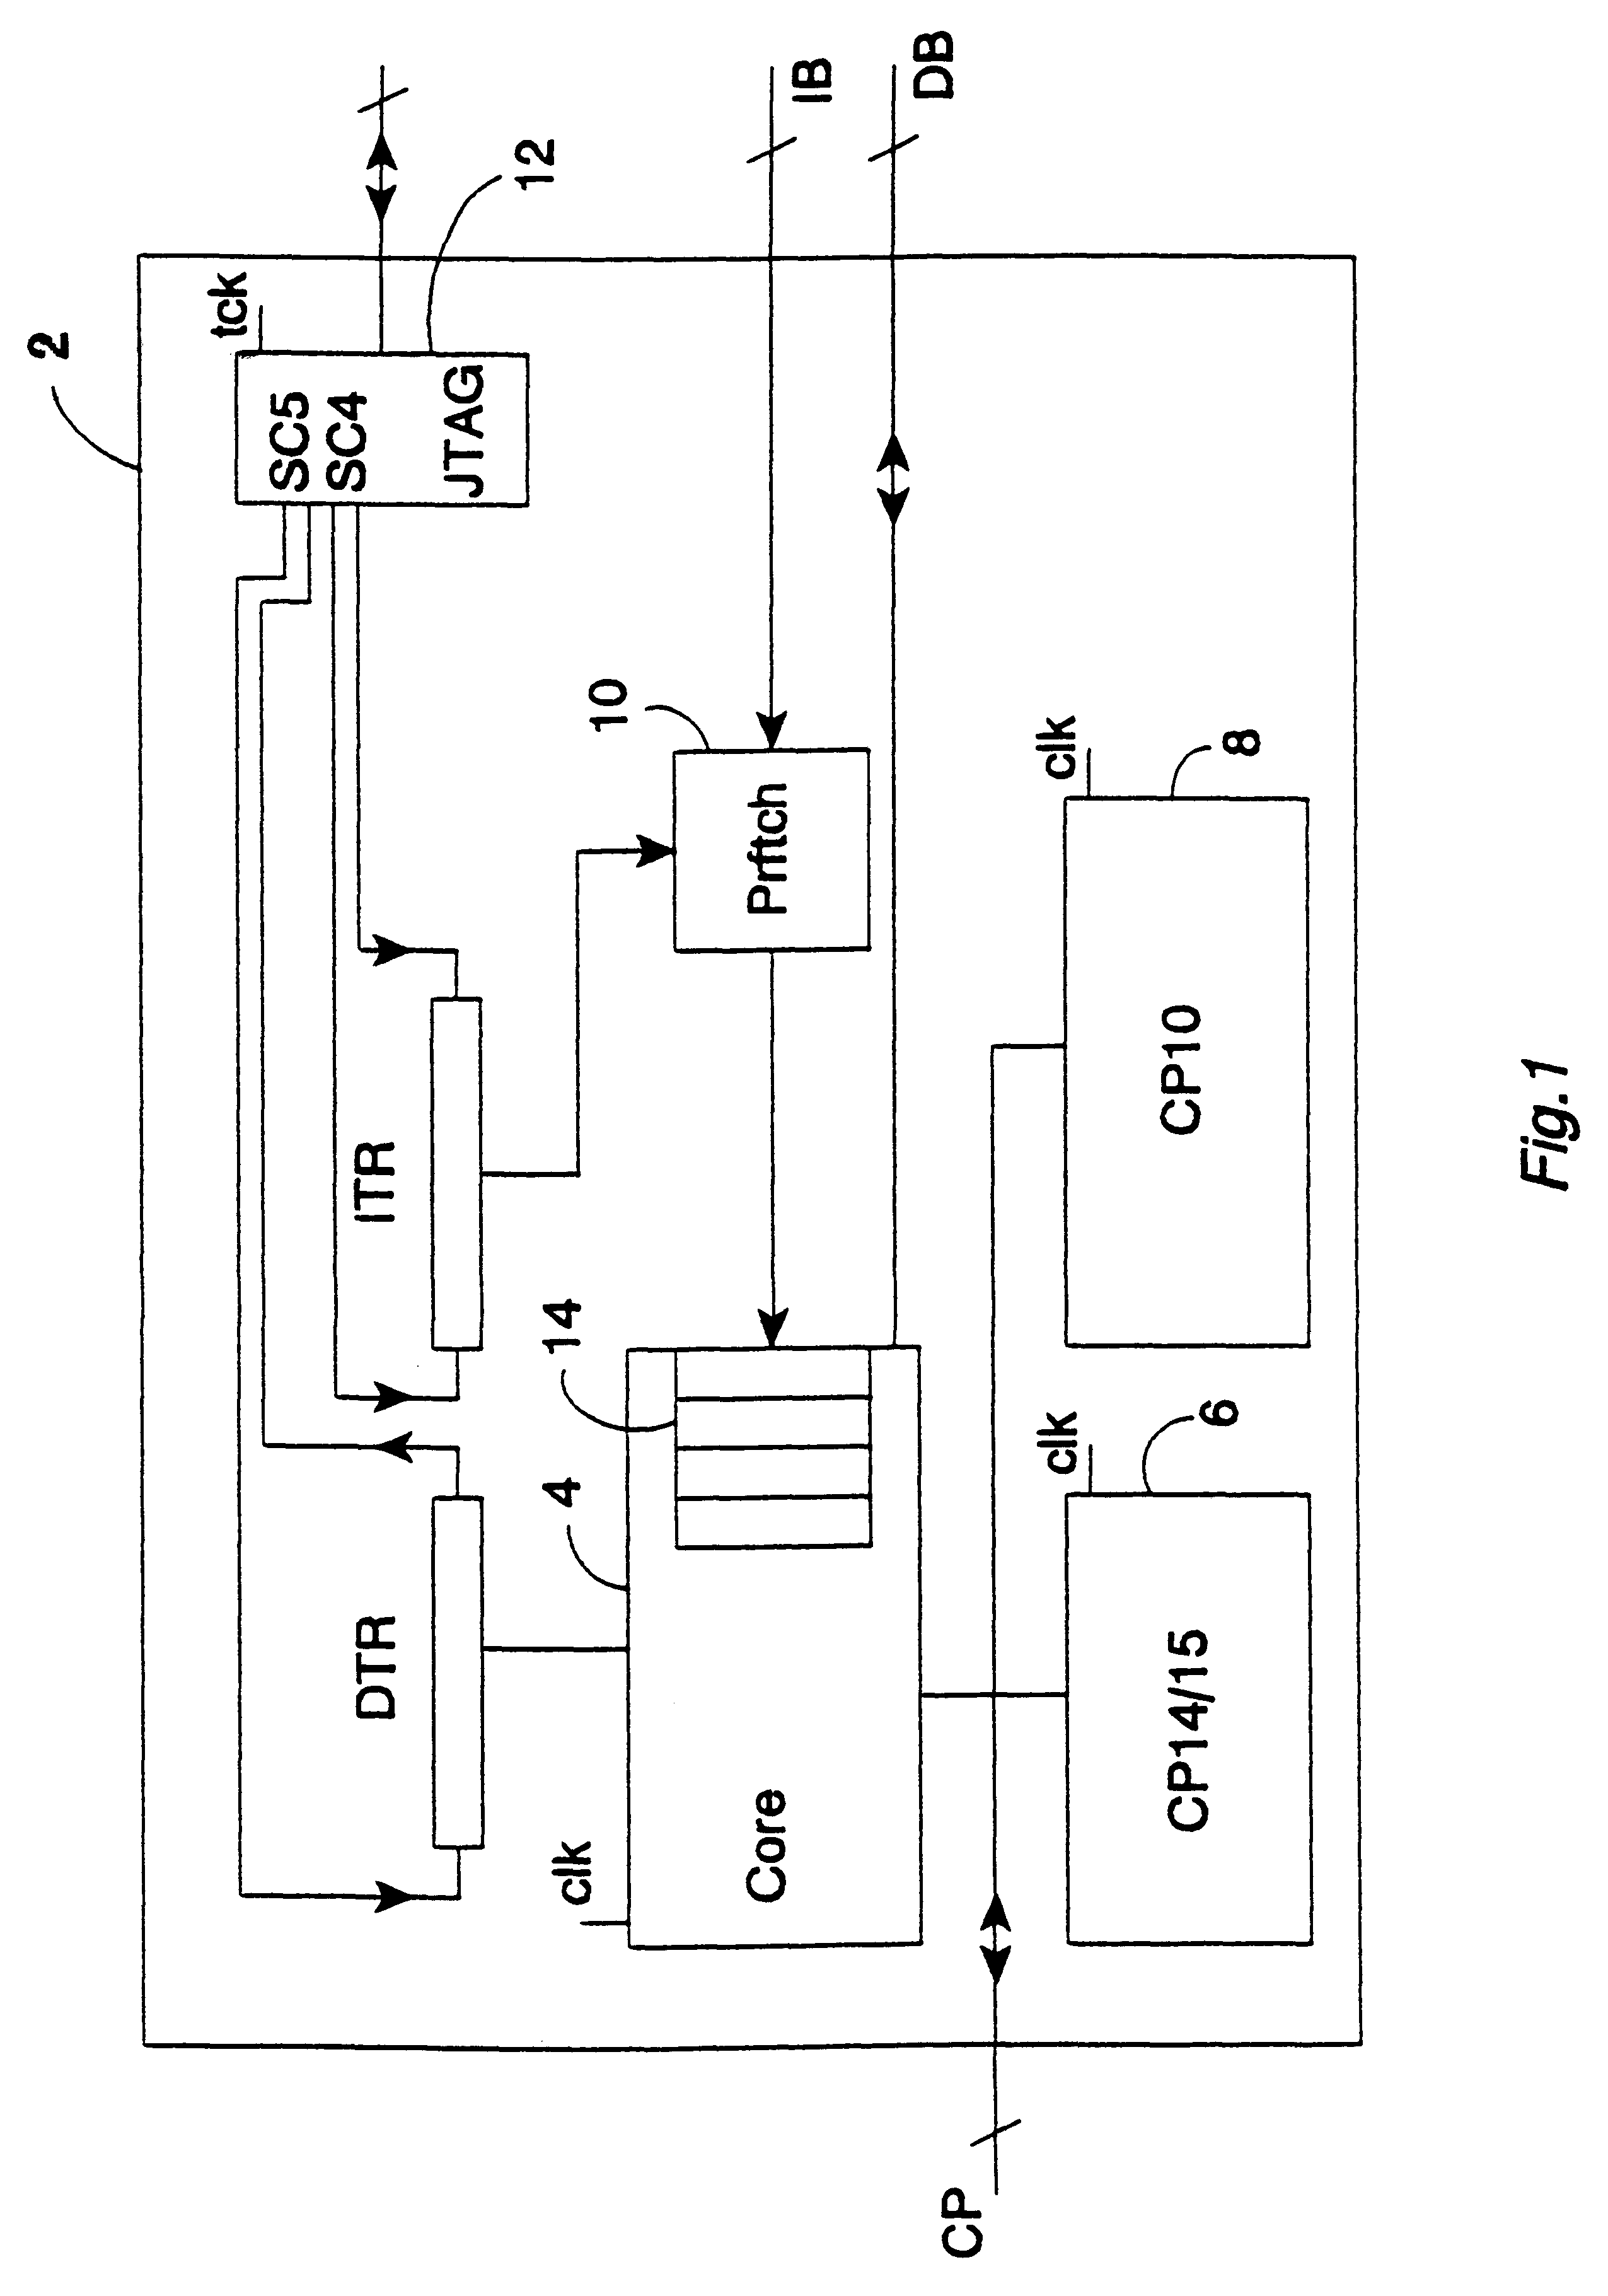 Debug mechanism for data processing systems